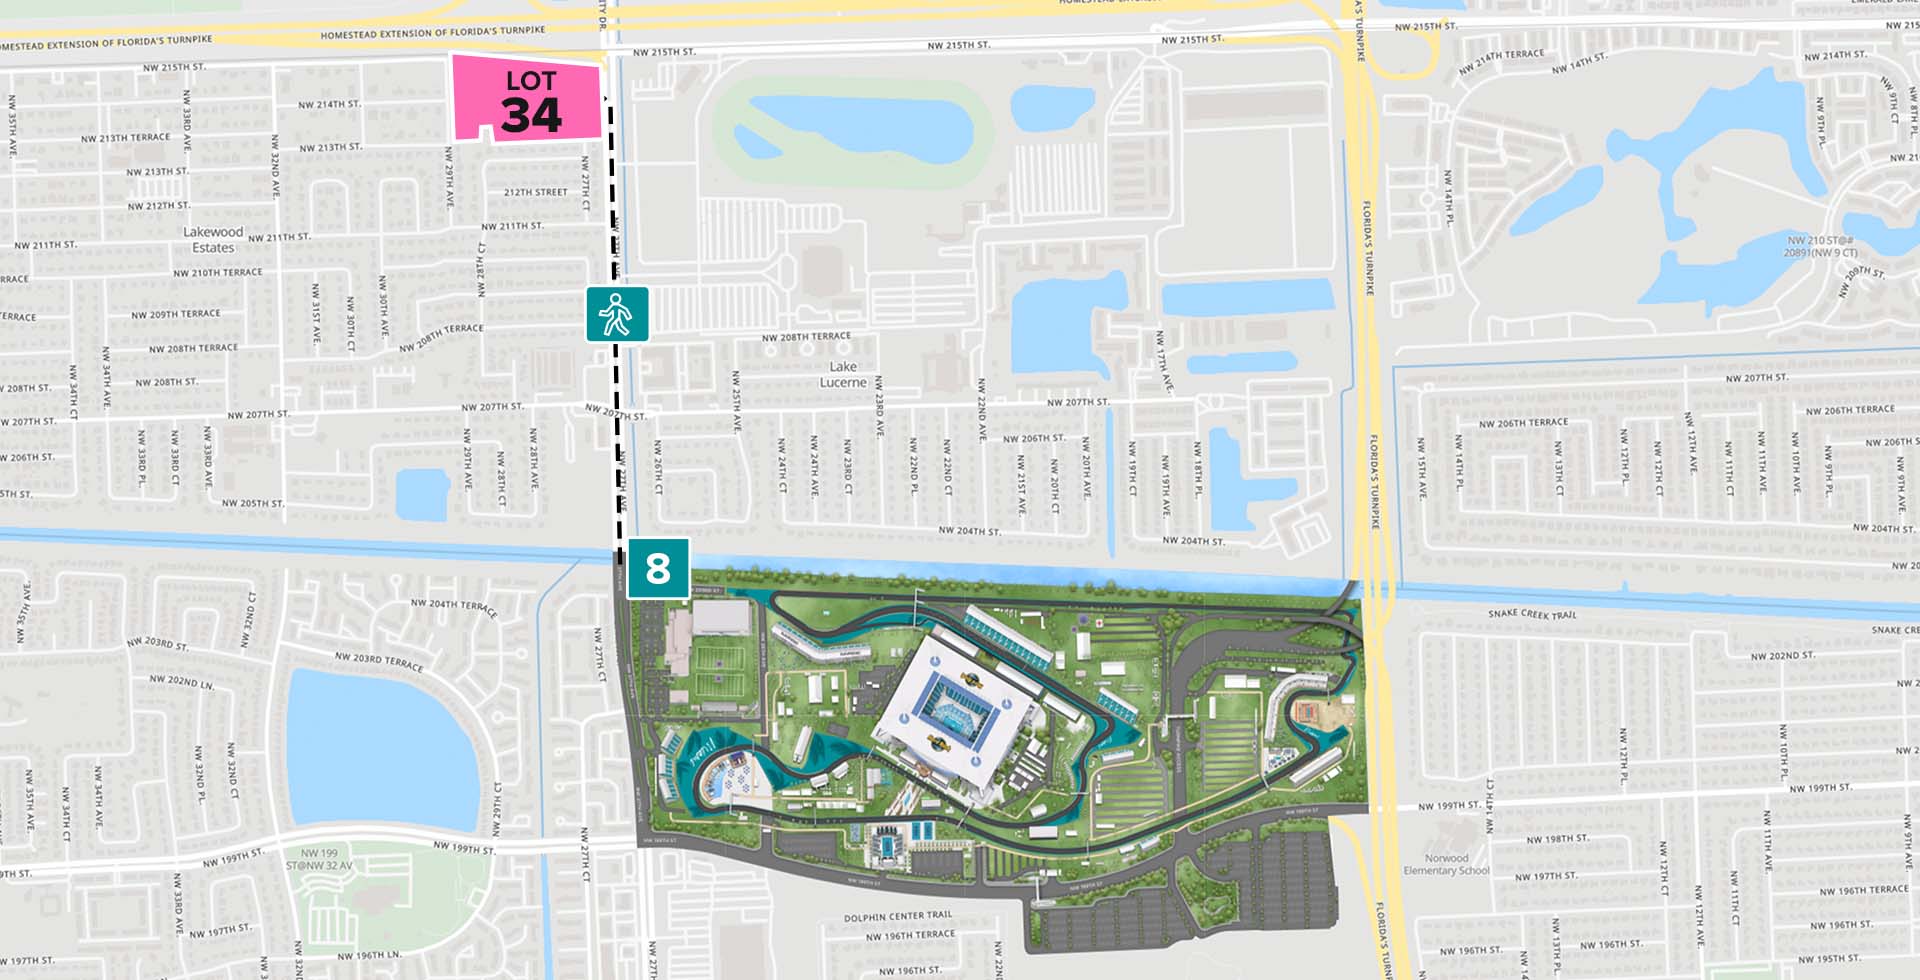 Parking Lot Location Map for Pink Lot 34 at the Formula 1 Crypto.com Miami Grand Prix